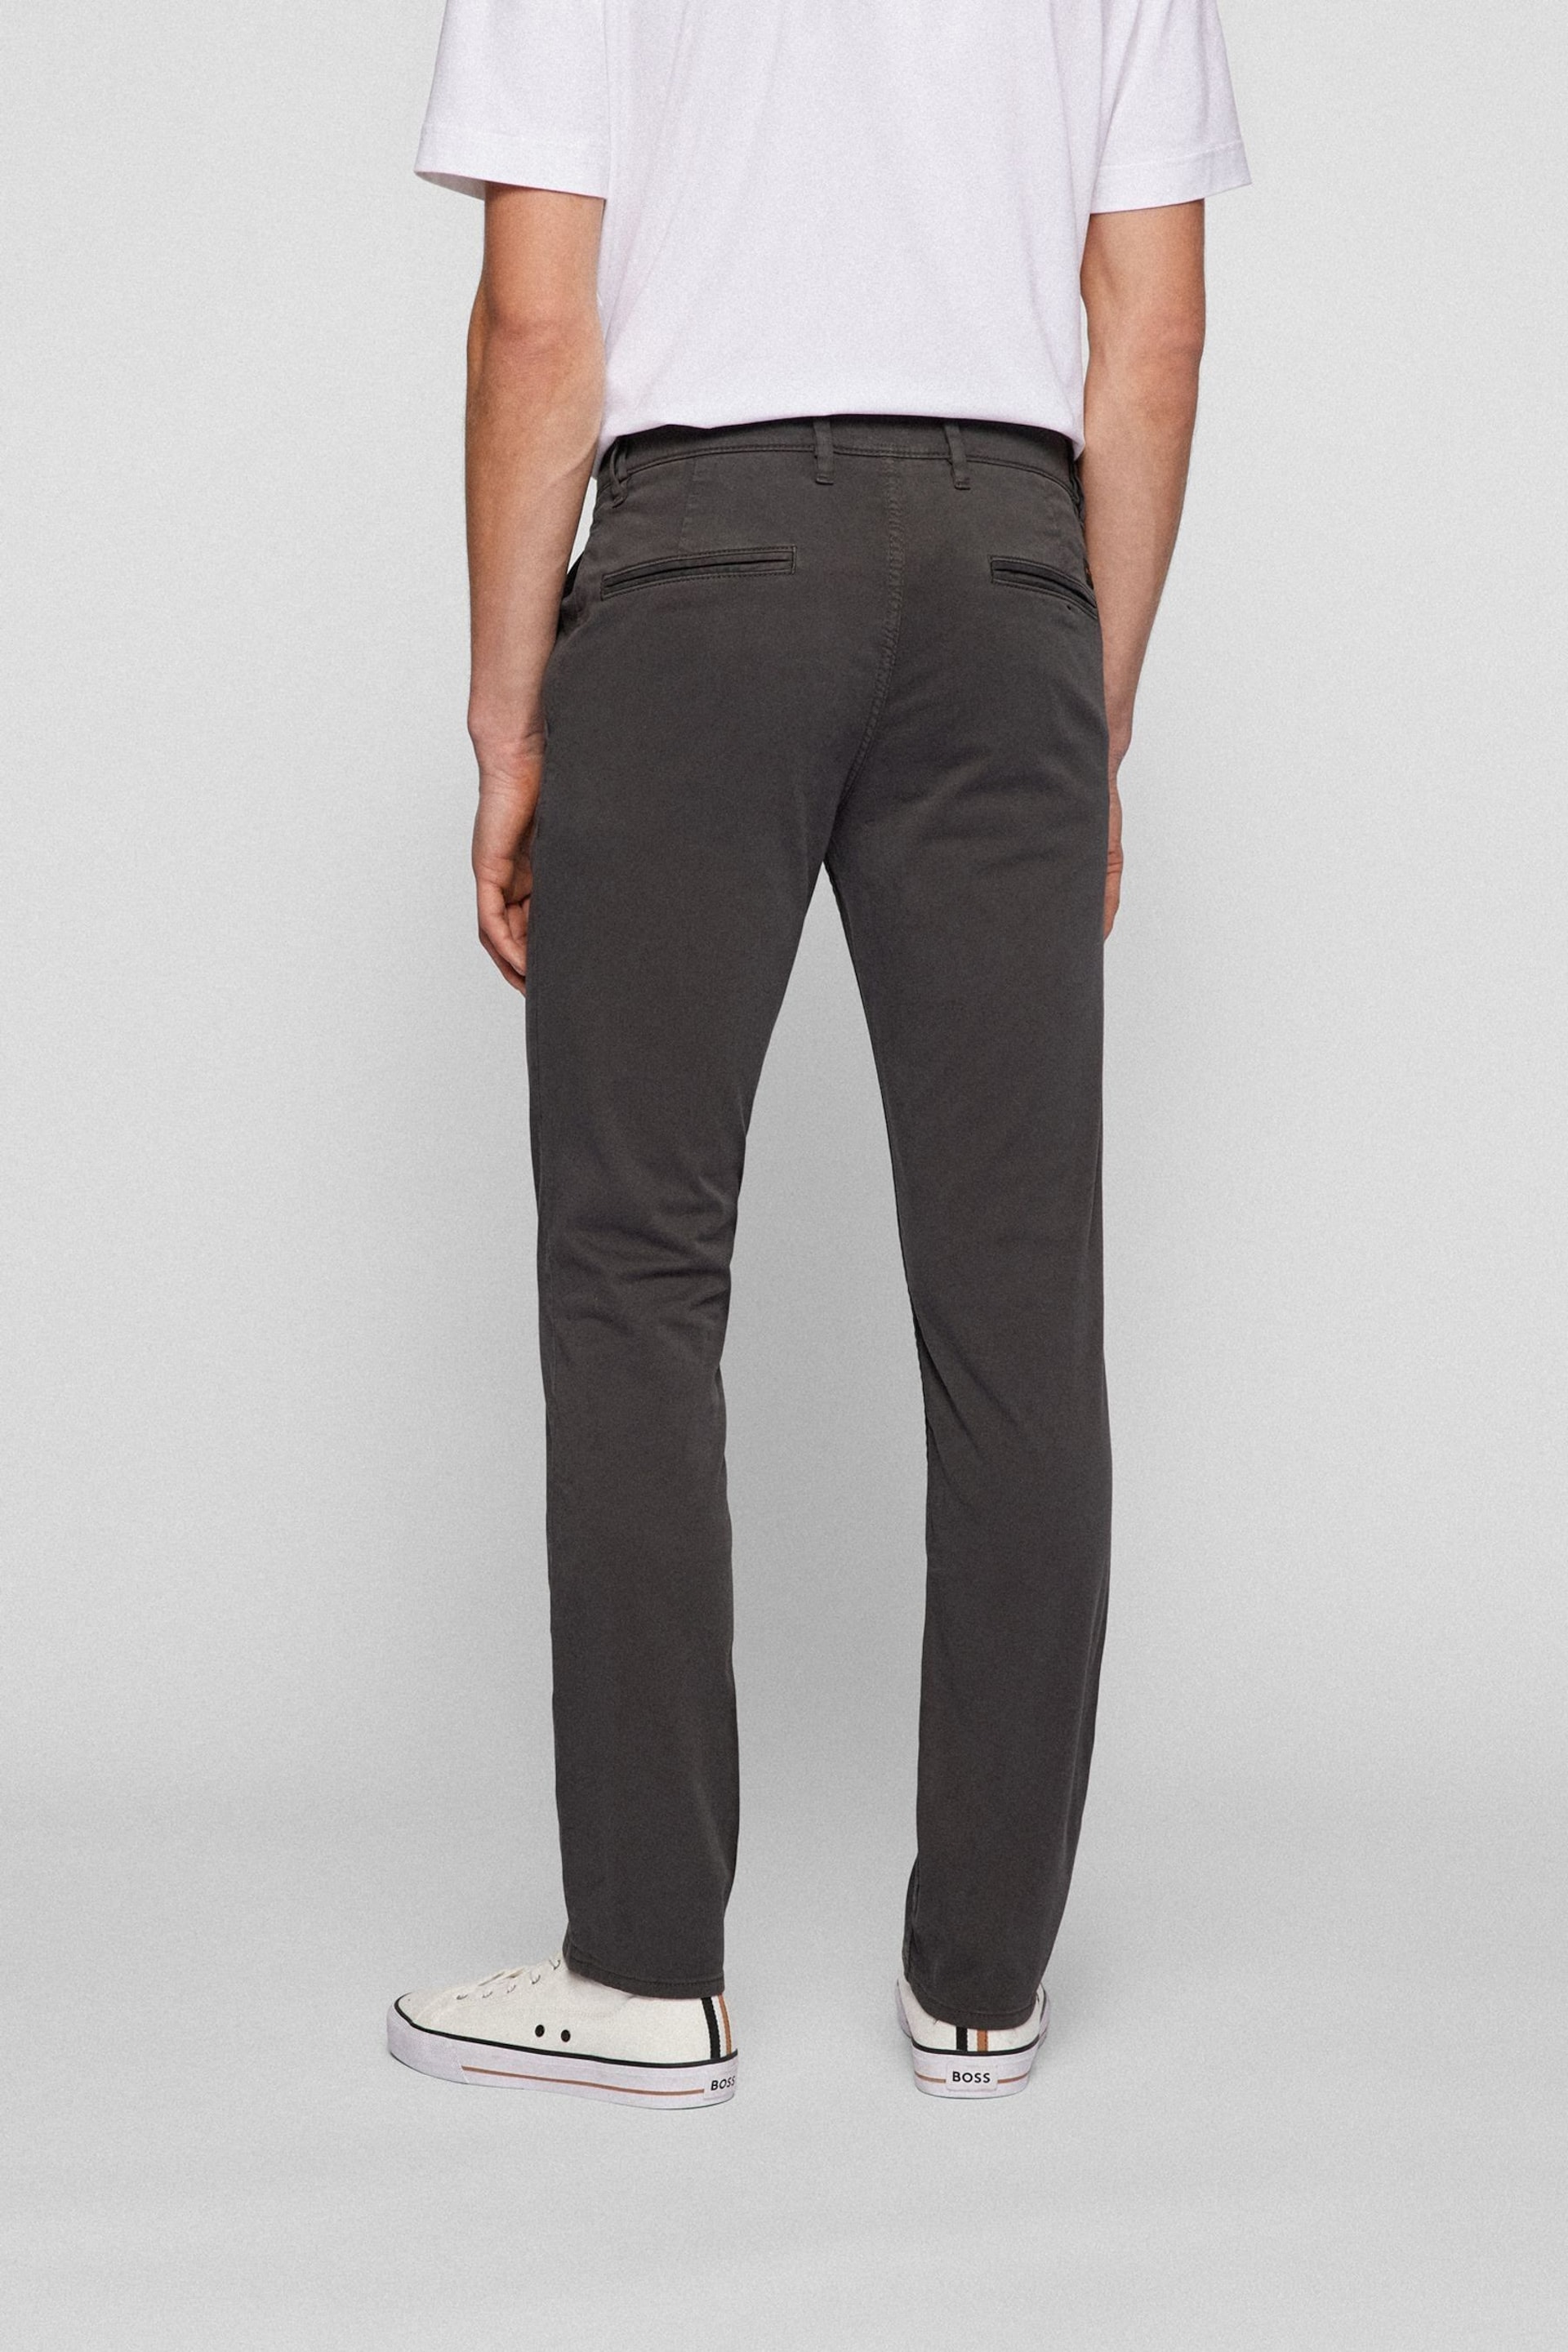 BOSS Charcoal Grey Schino Slim Fit Chinos - Image 2 of 5